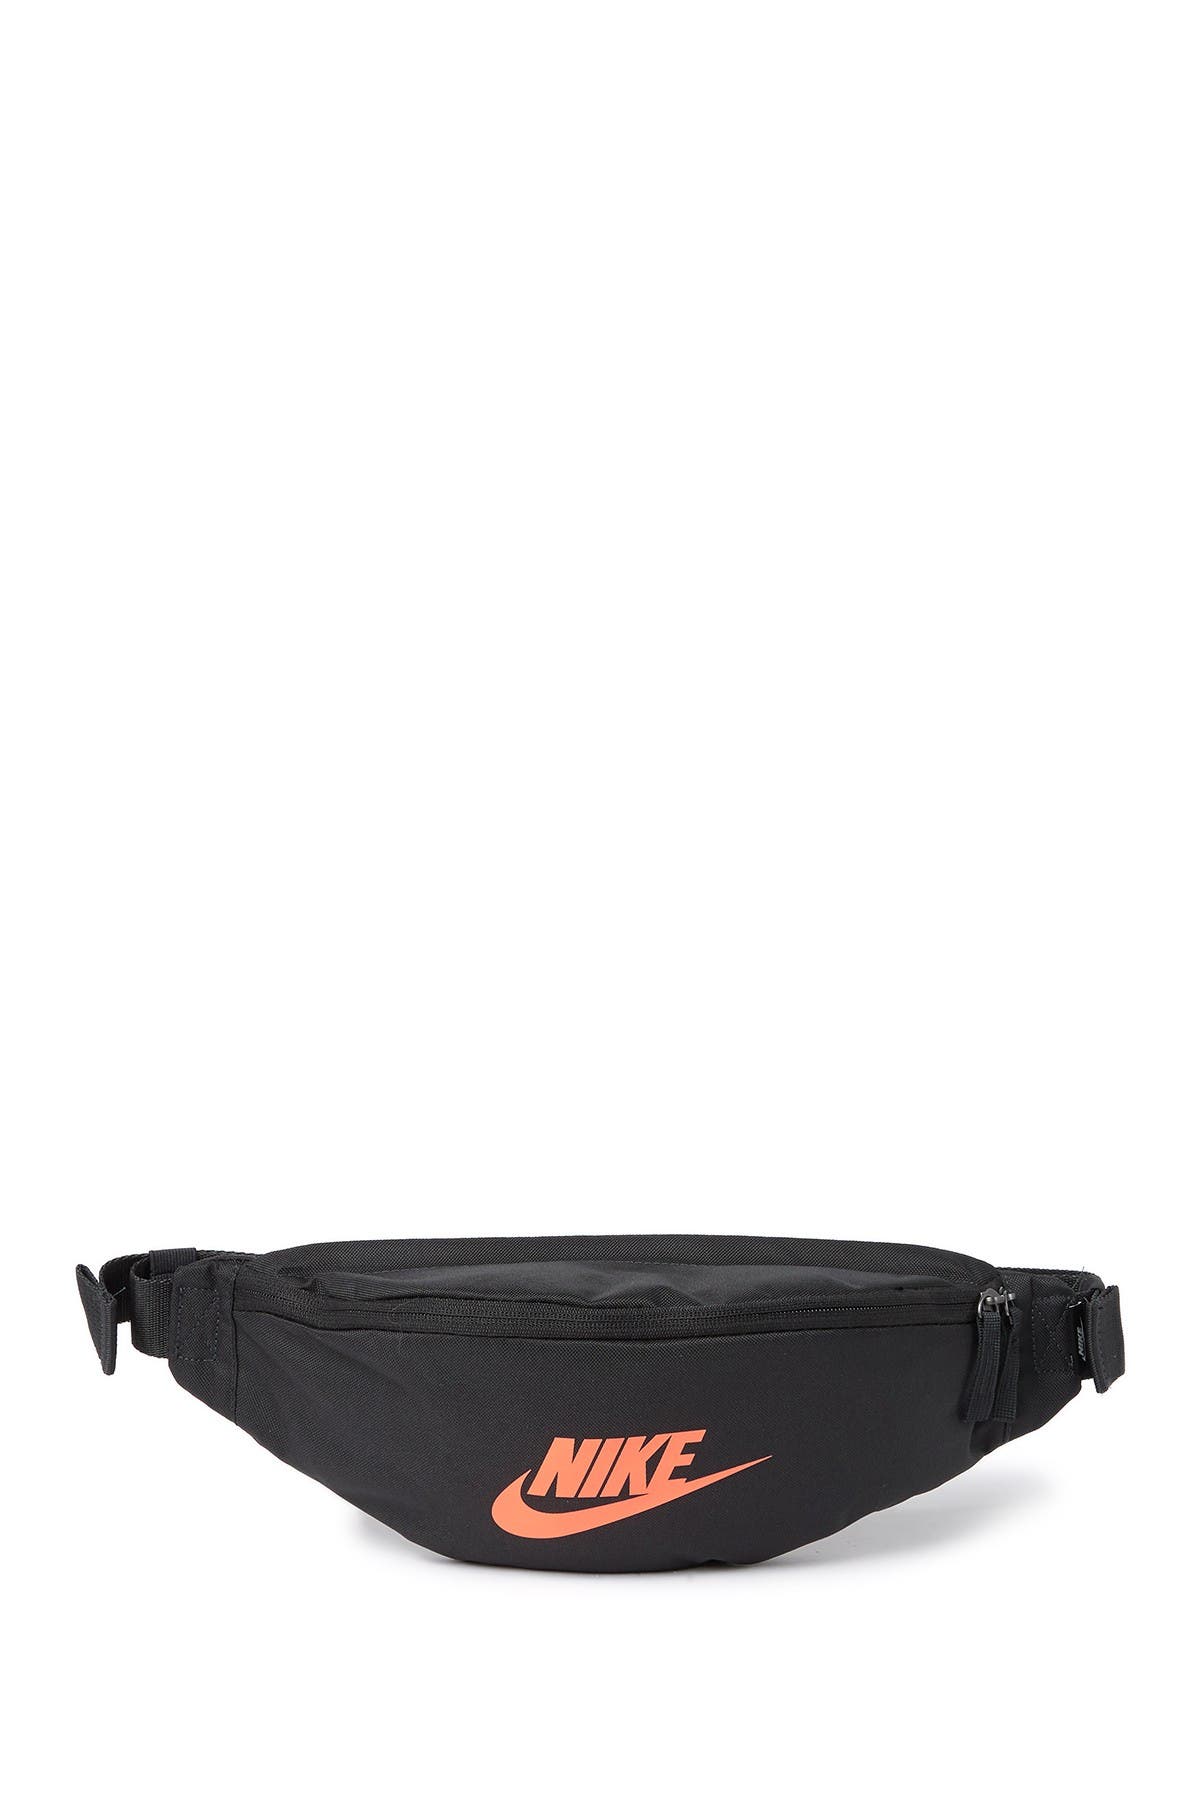 nike heritage hip pack one size